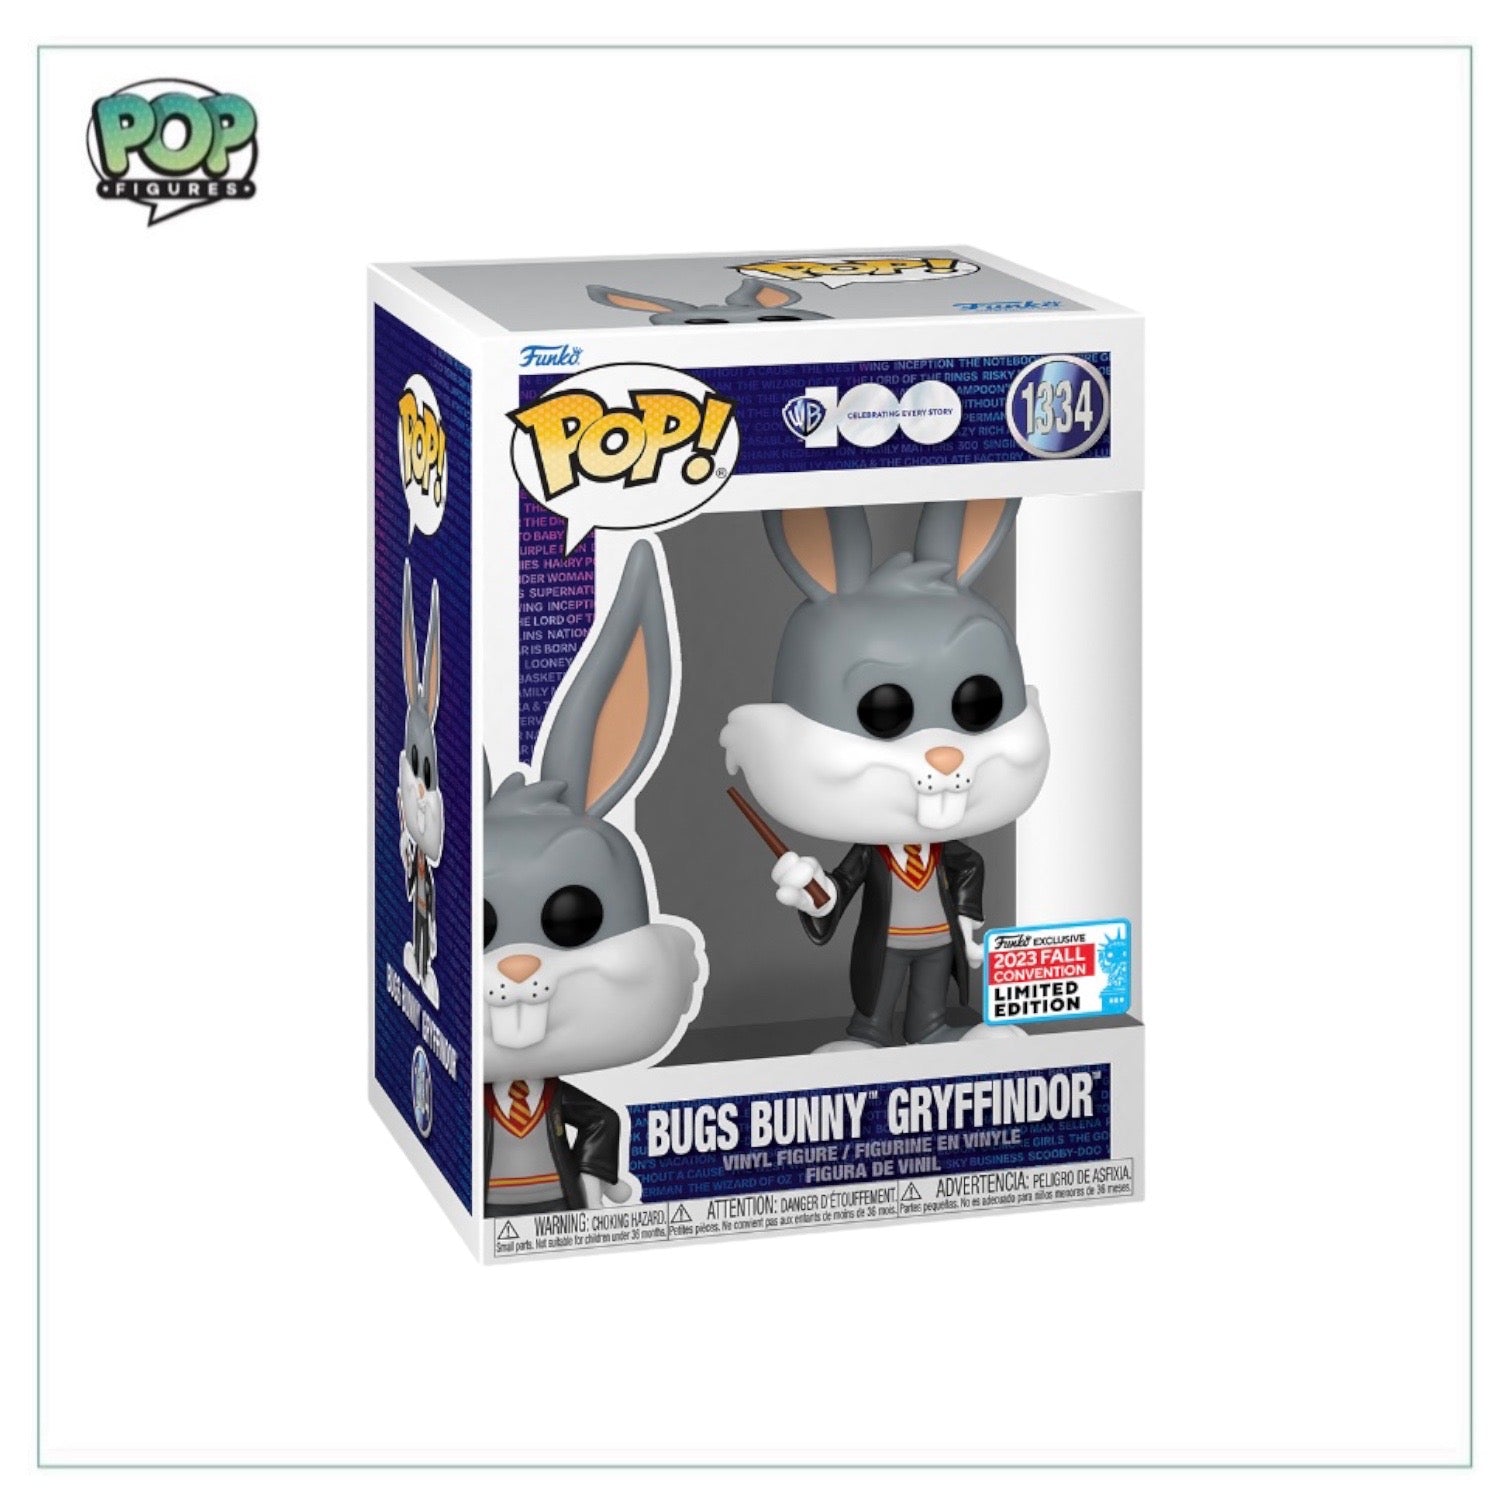 Bugs Bunny Gryffindor #1334 Funko Pop! - WB 100 - NYCC 2023 Shared Exclusive